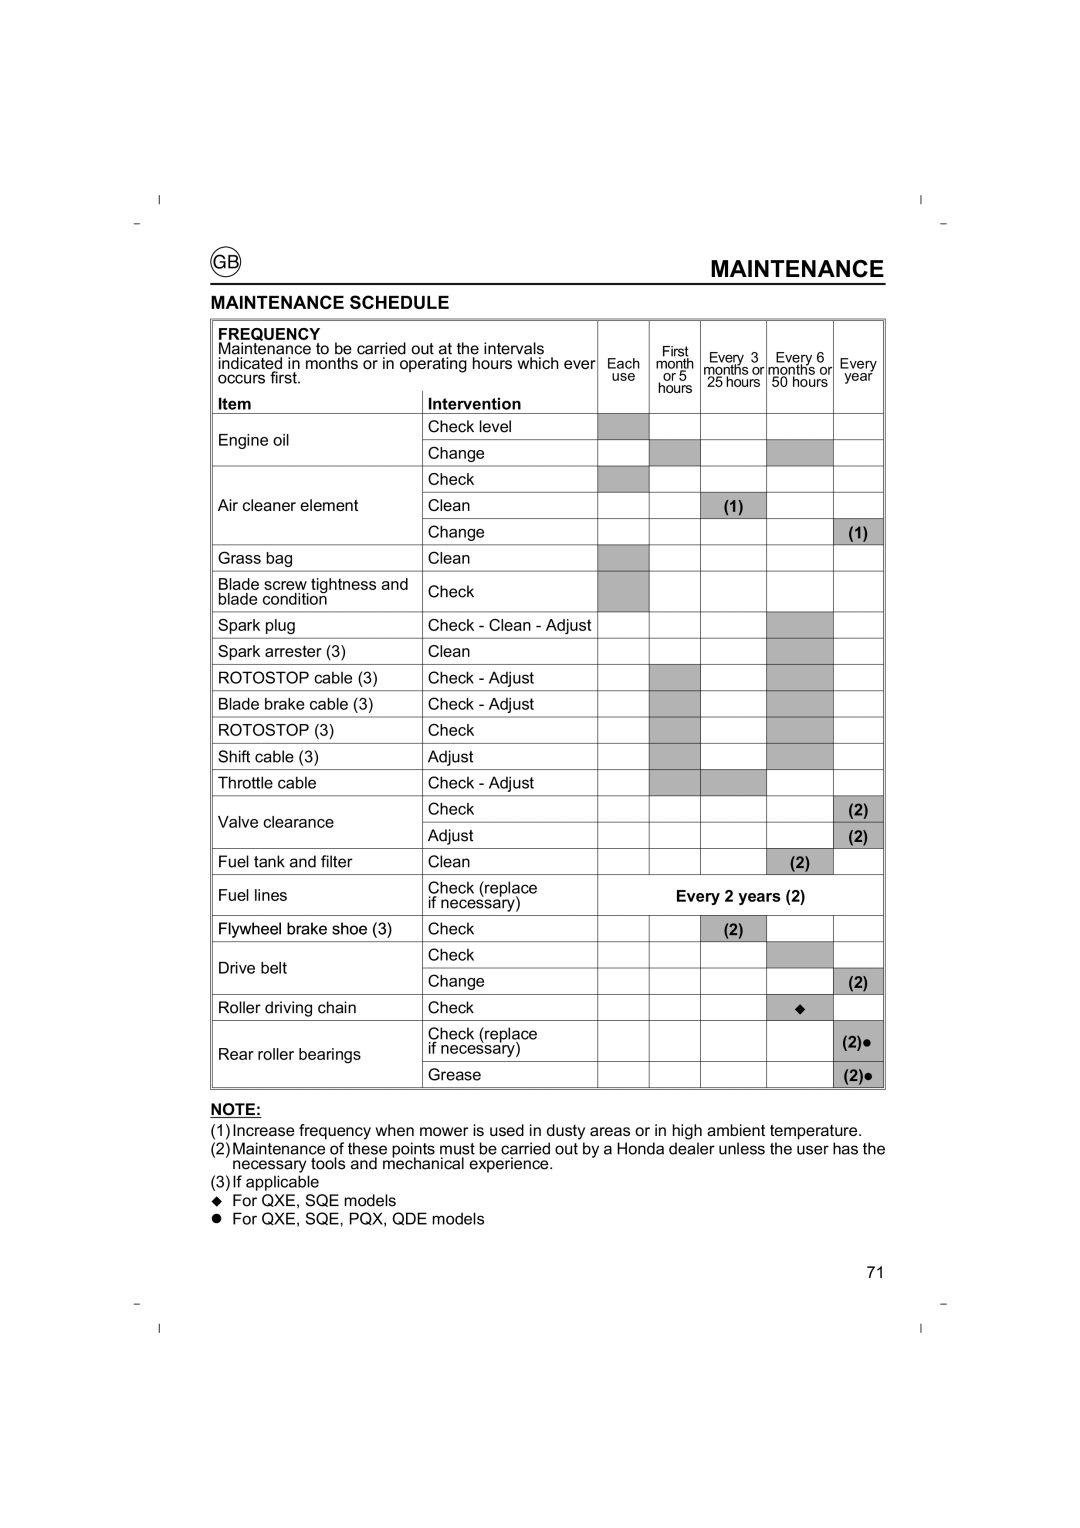 Honda Power Equipment HRB425C owner manual Maintenance Schedule, Frequency, Intervention, Every 2 years 